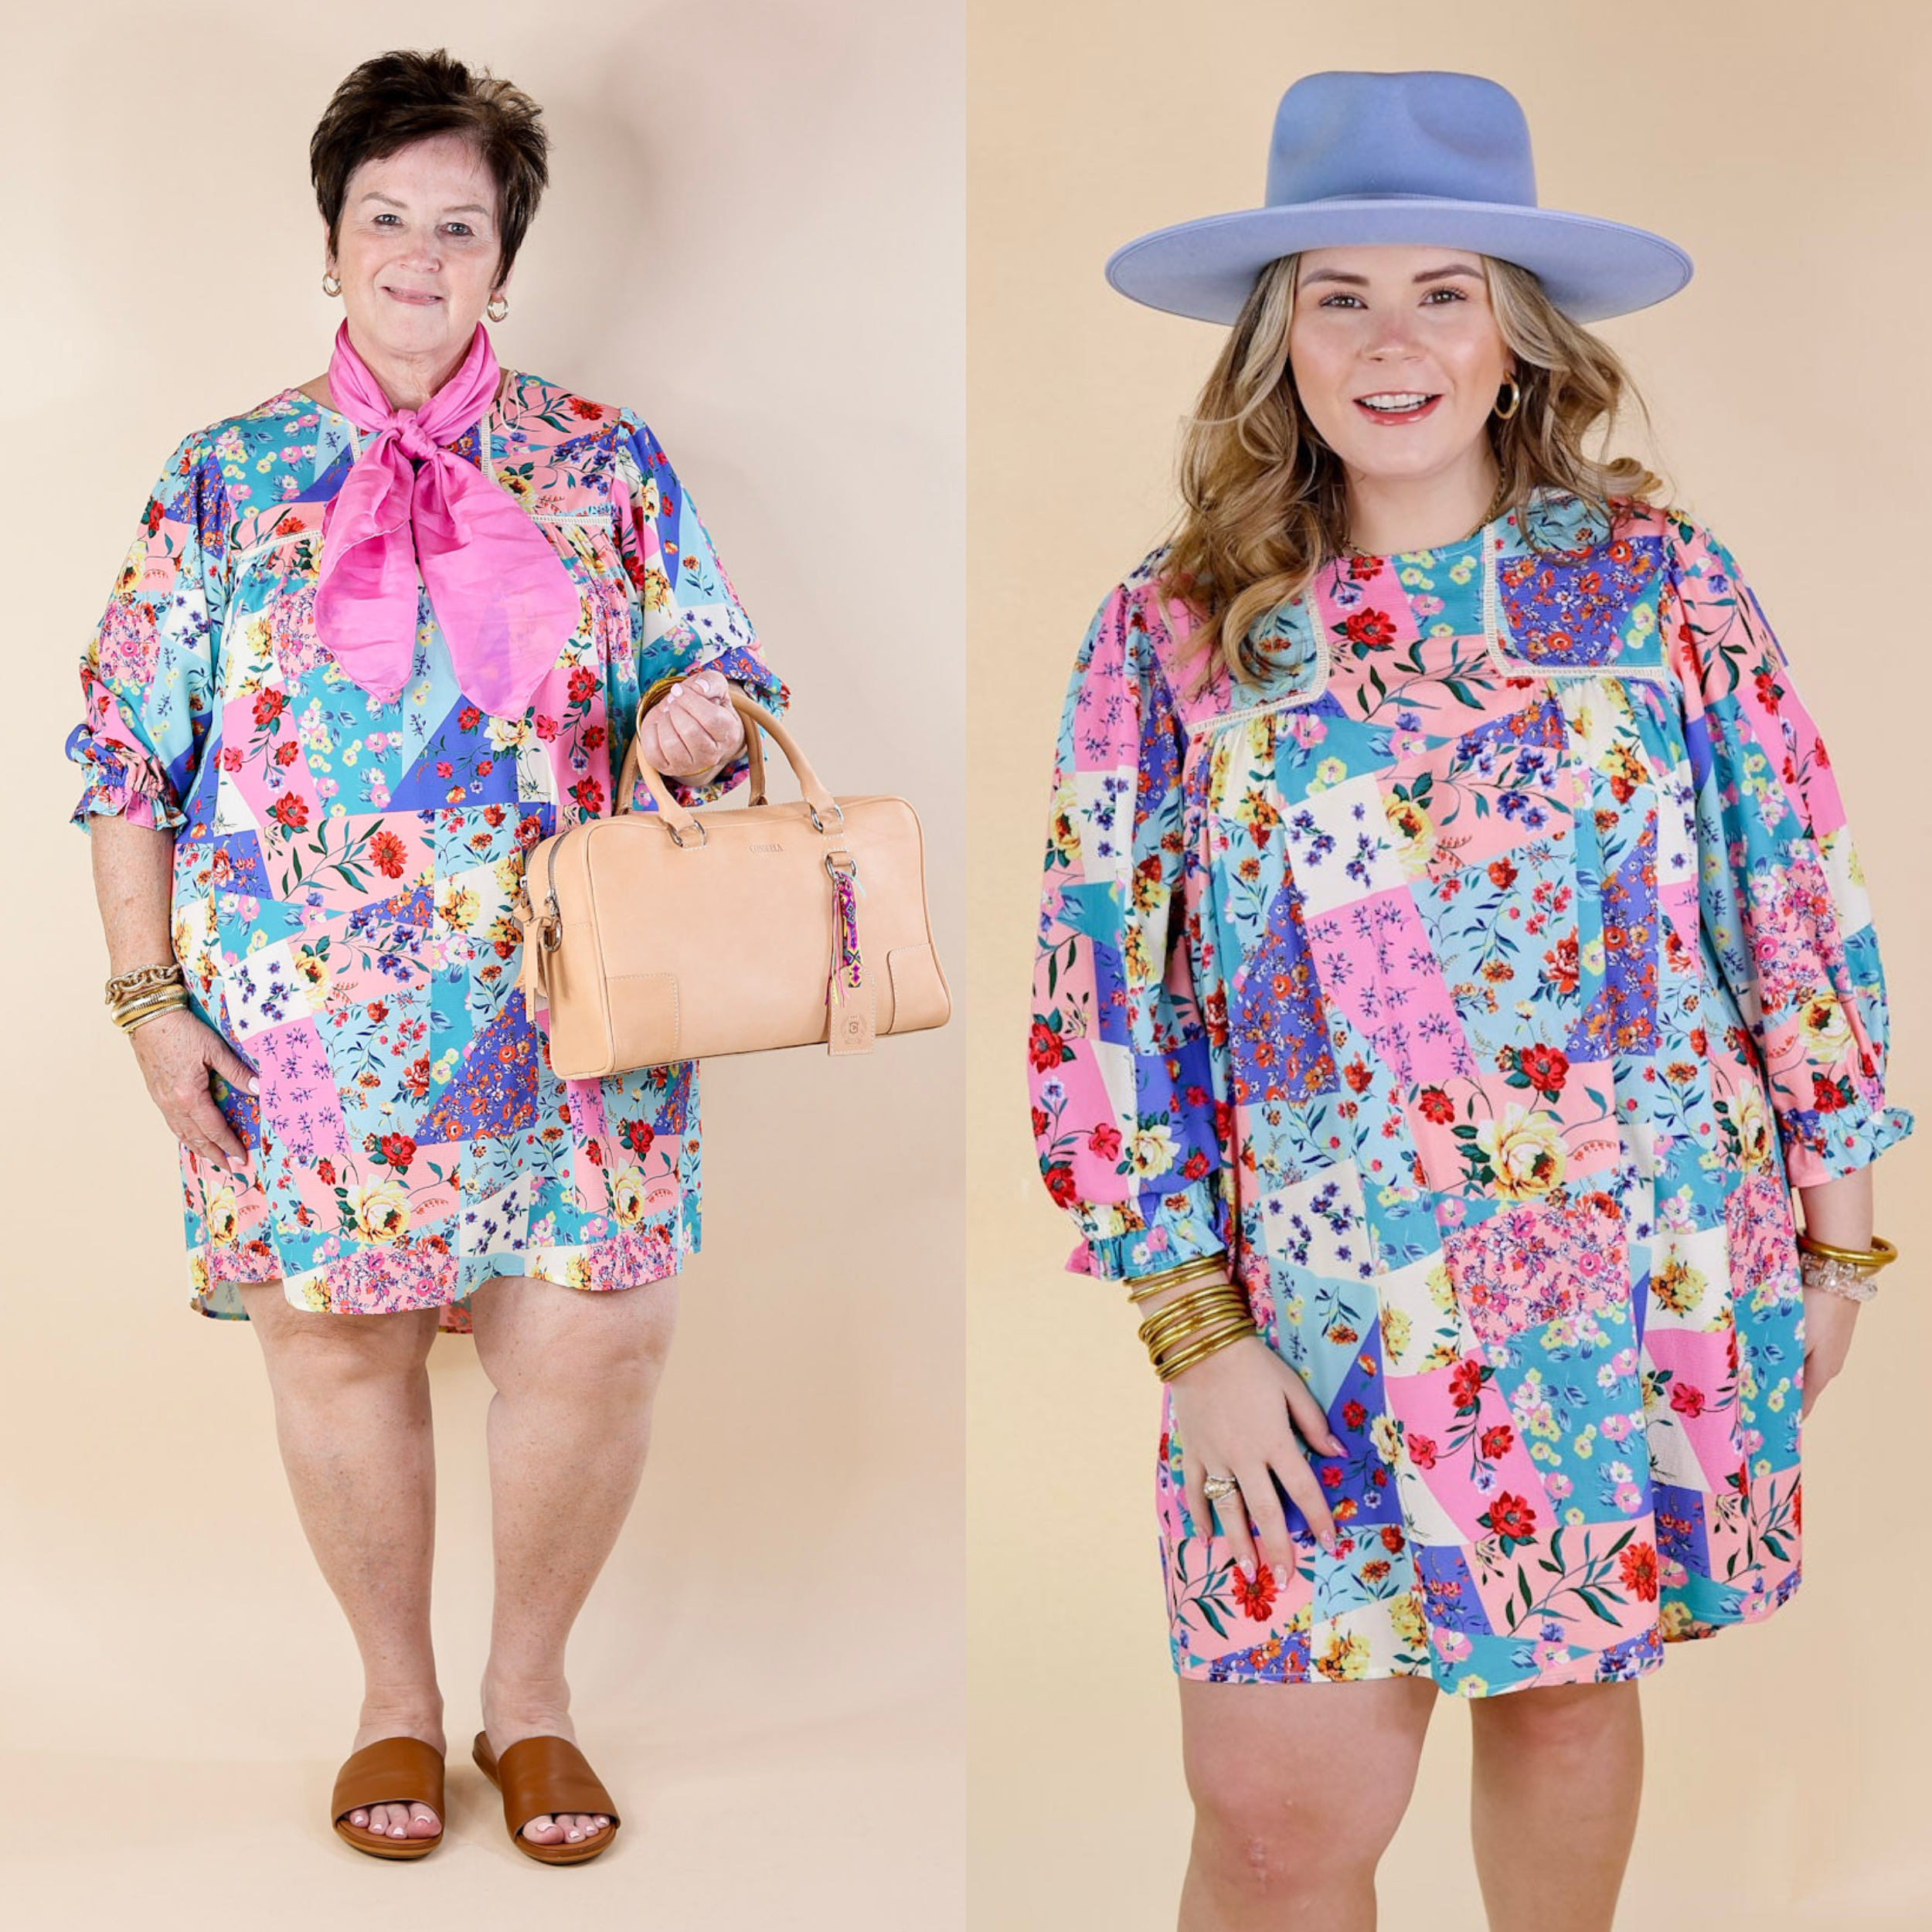 Floral Paradise Floral Patch Pattern Dress in Blue and Pink - Giddy Up Glamour Boutique